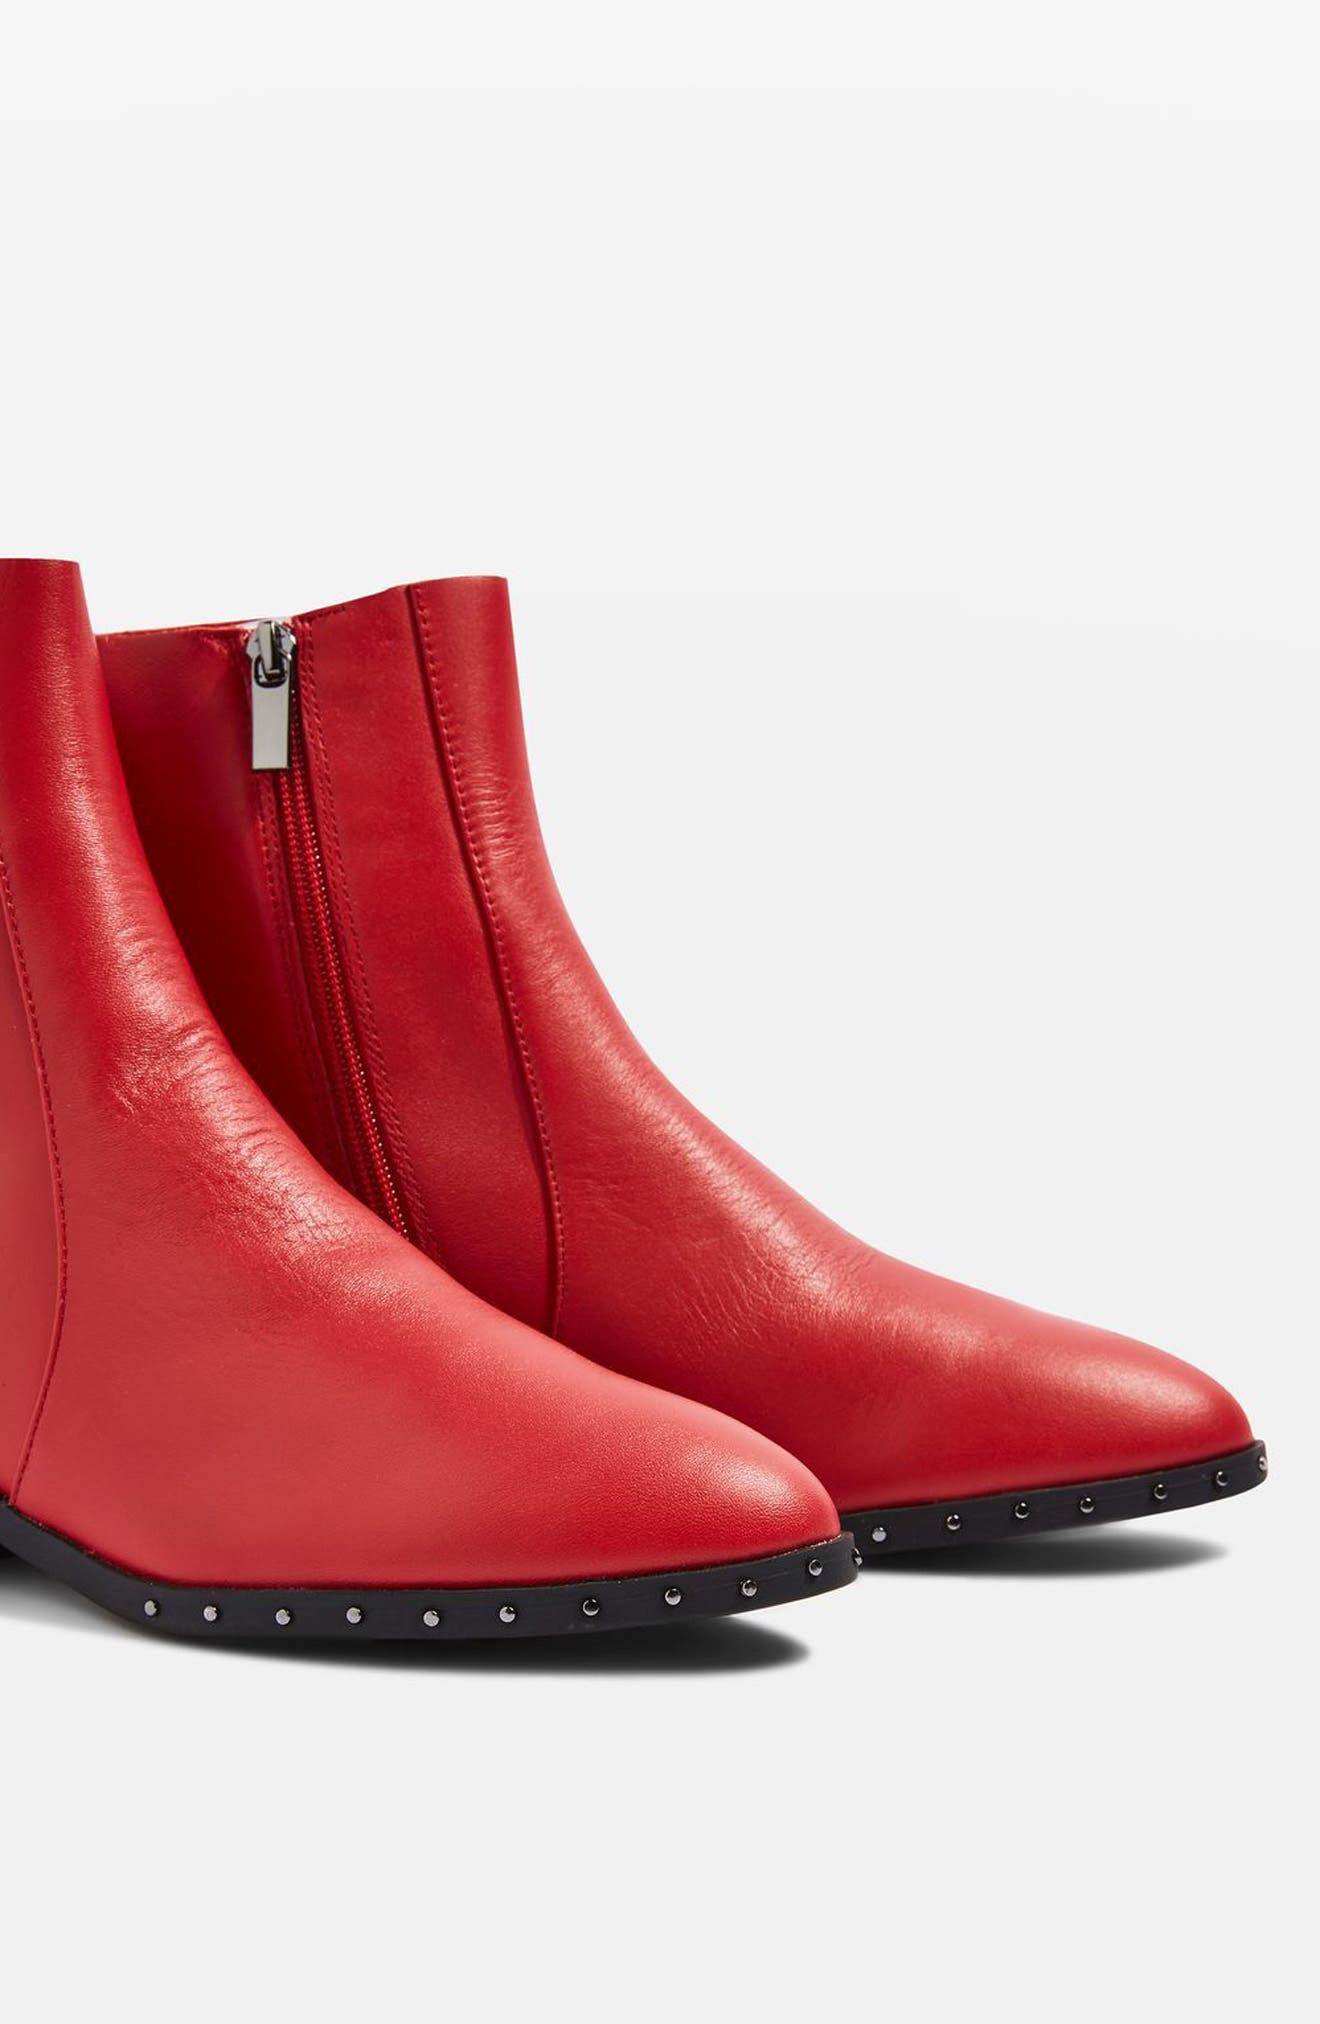 Topshop Kash Sock Boot (Women) on sale at Nordstrom for $39.99 was $80, 50% off